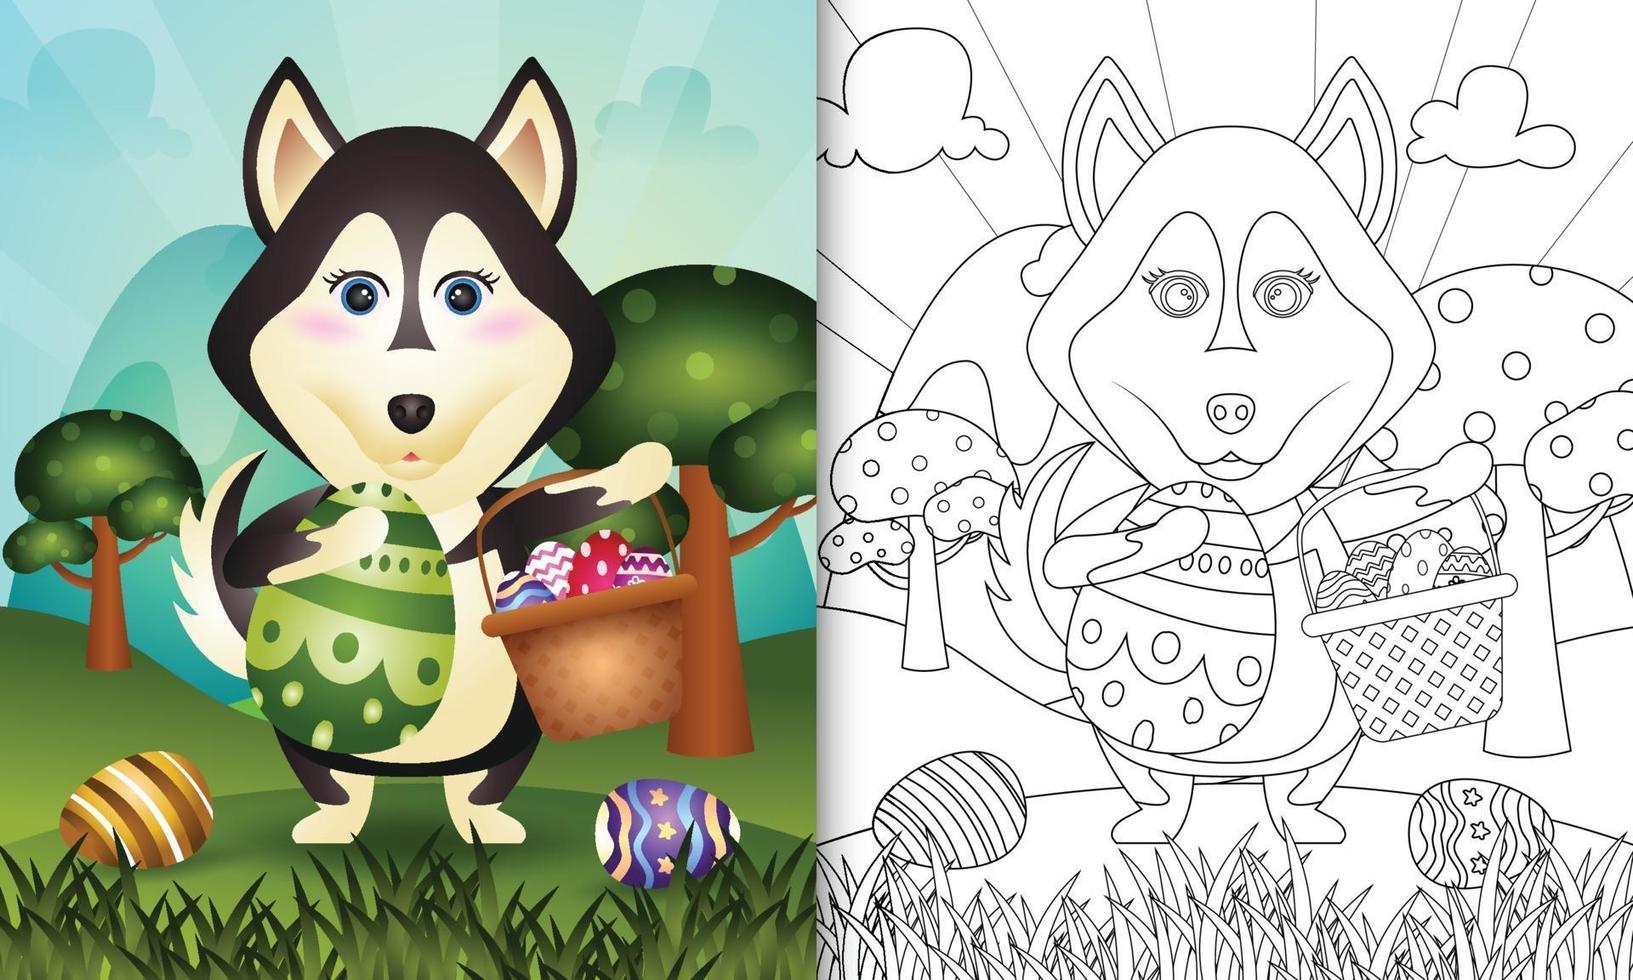 coloring book for kids themed happy easter day with character illustration of a cute husky dog holding the bucket egg and easter egg vector